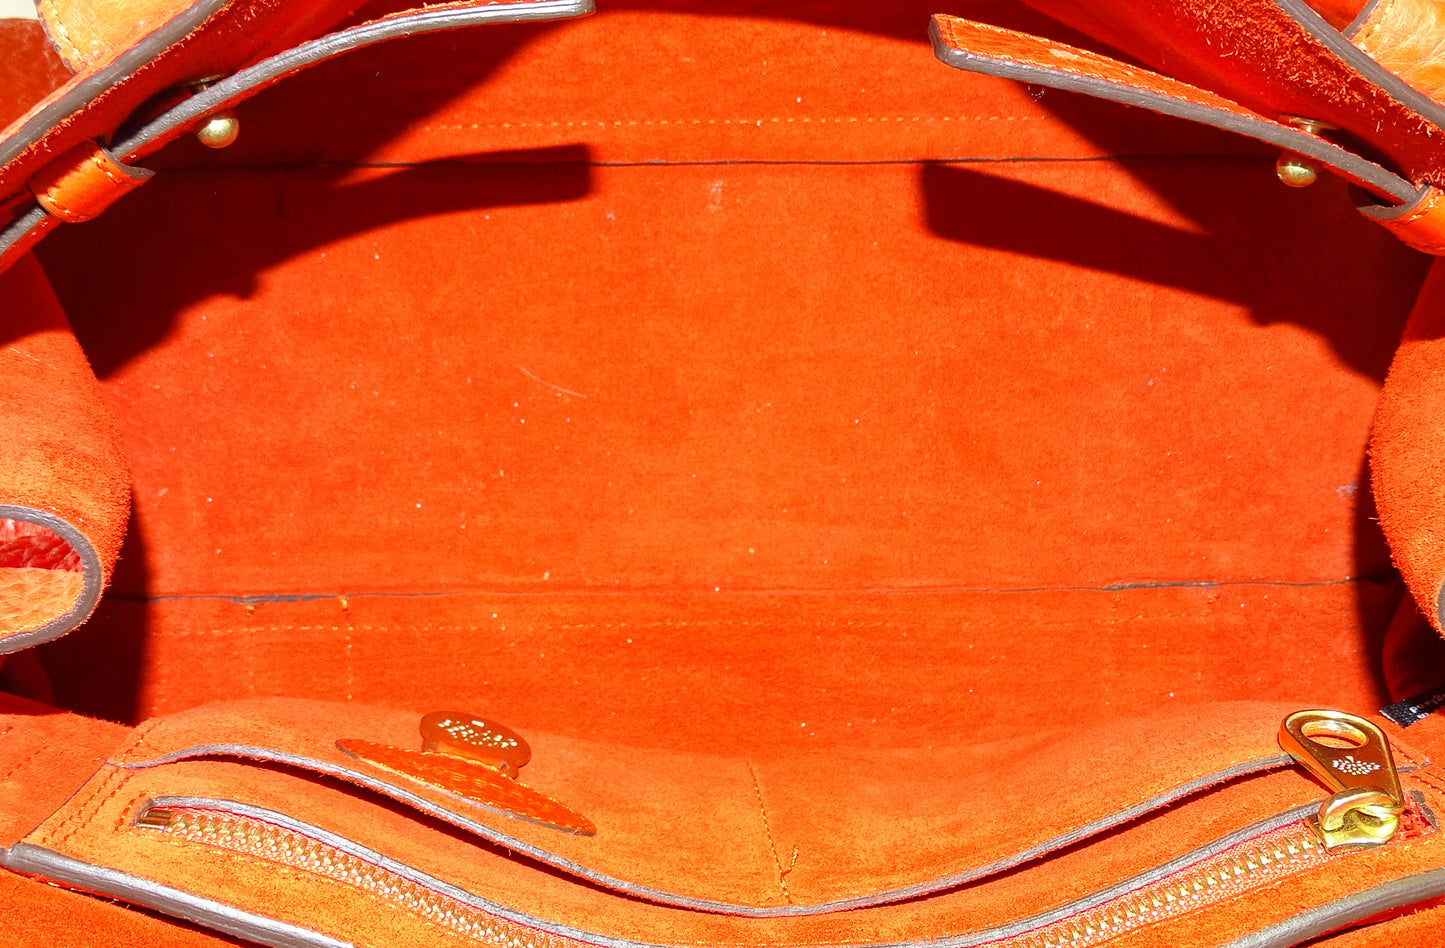 Mulberry Orange Leather East West Bayswater